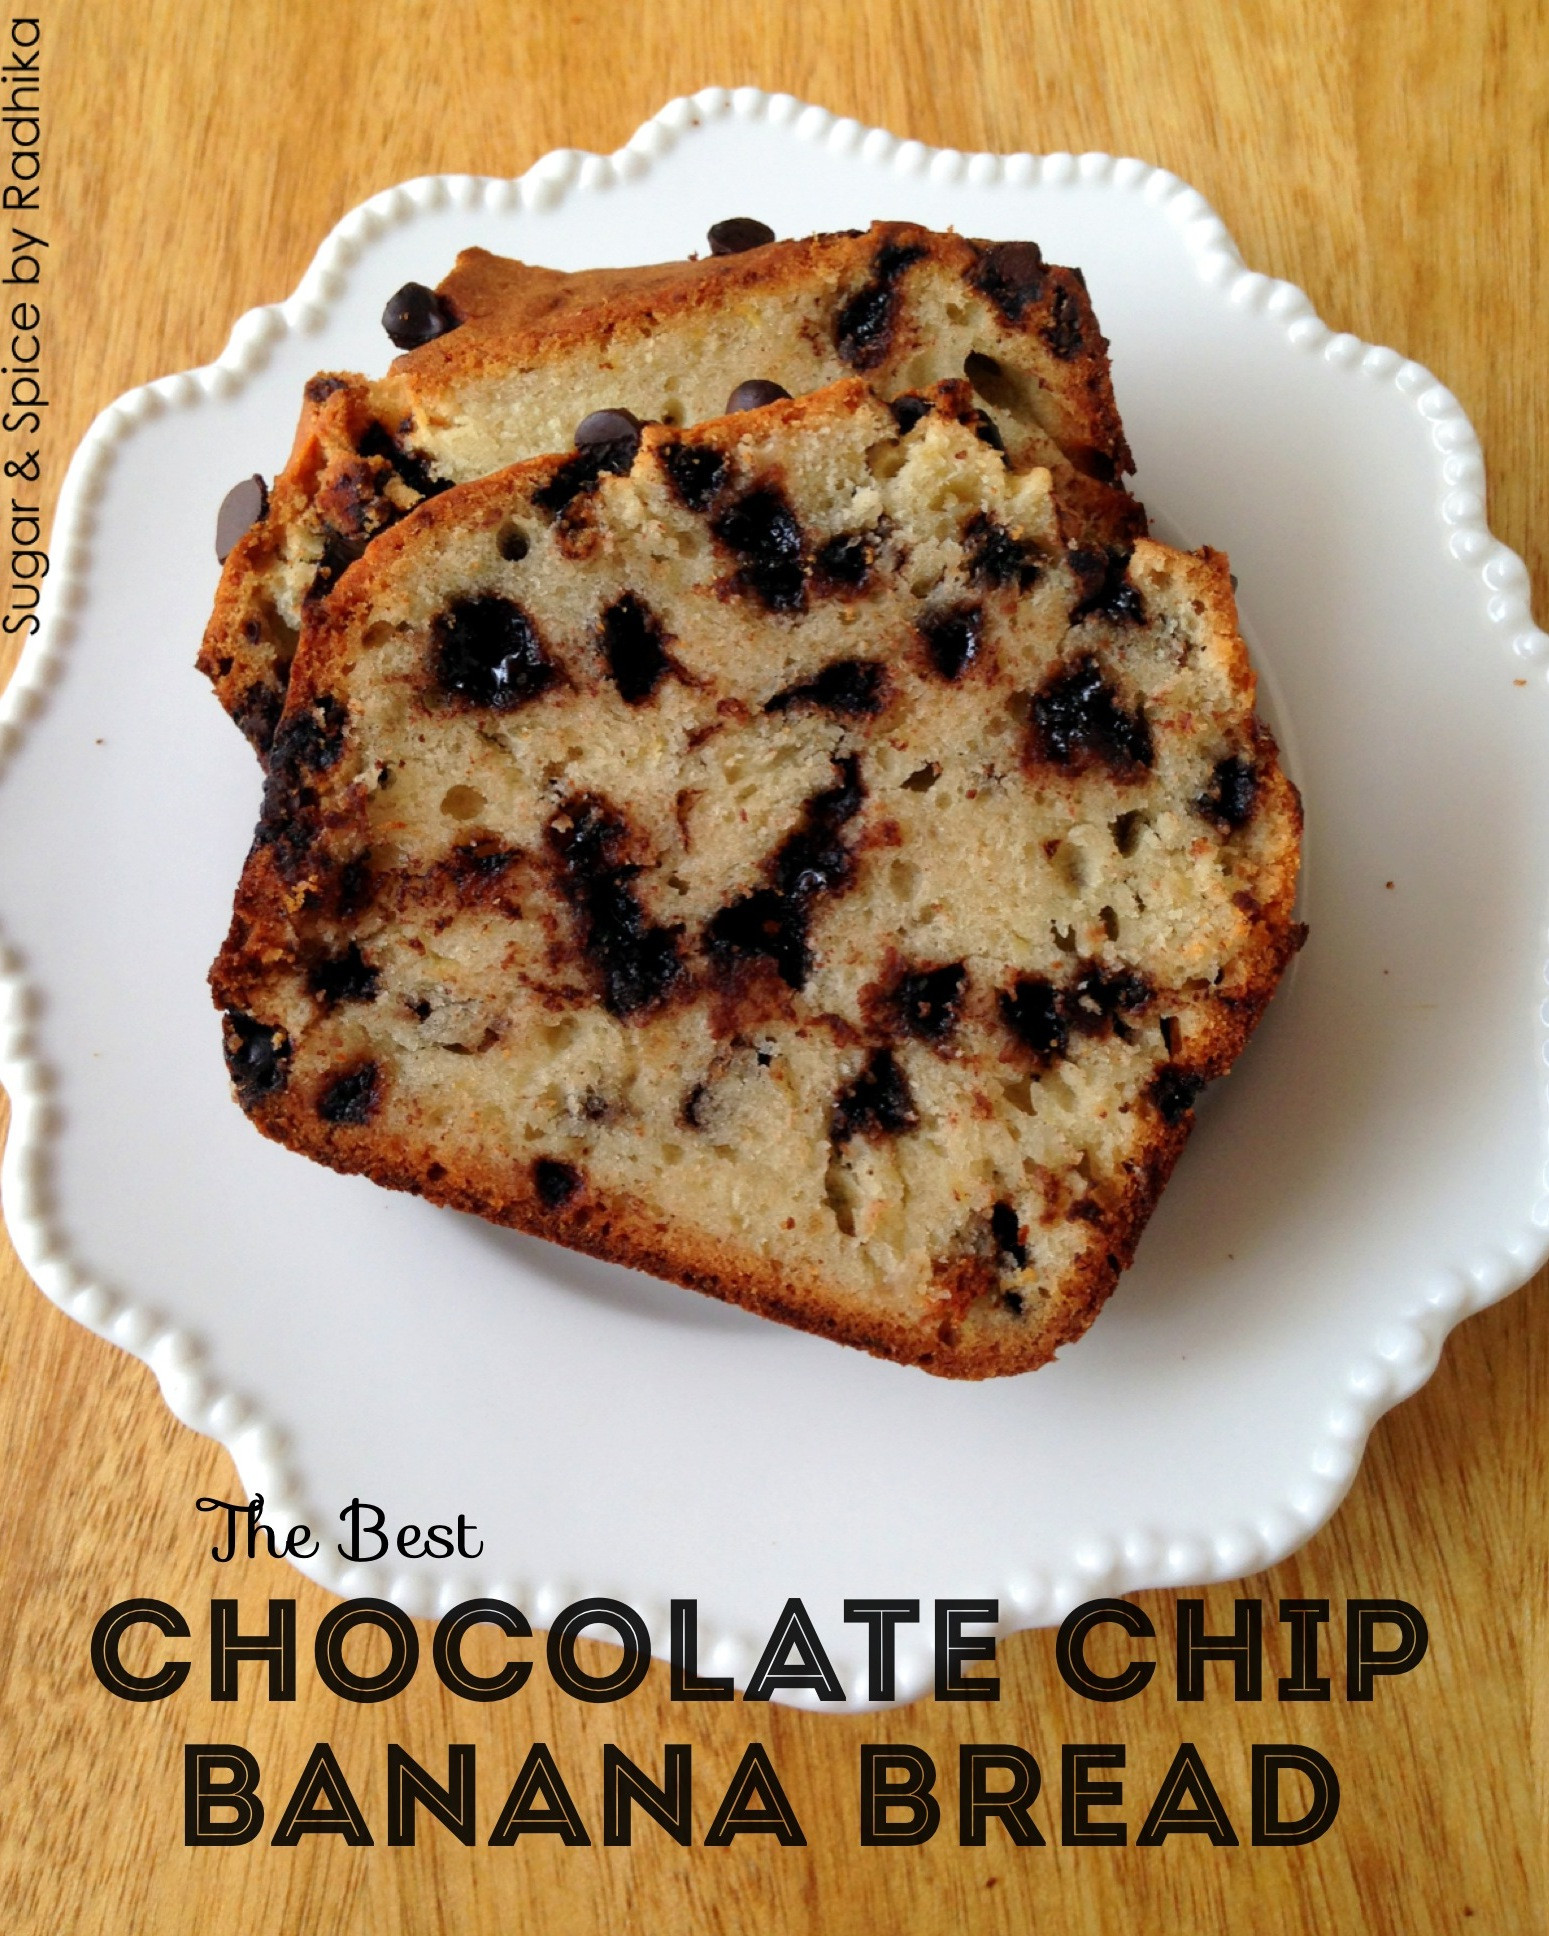 Best Chocolate Chip Banana Bread
 The Best Chocolate Chip Banana Bread Sugar & Spice by